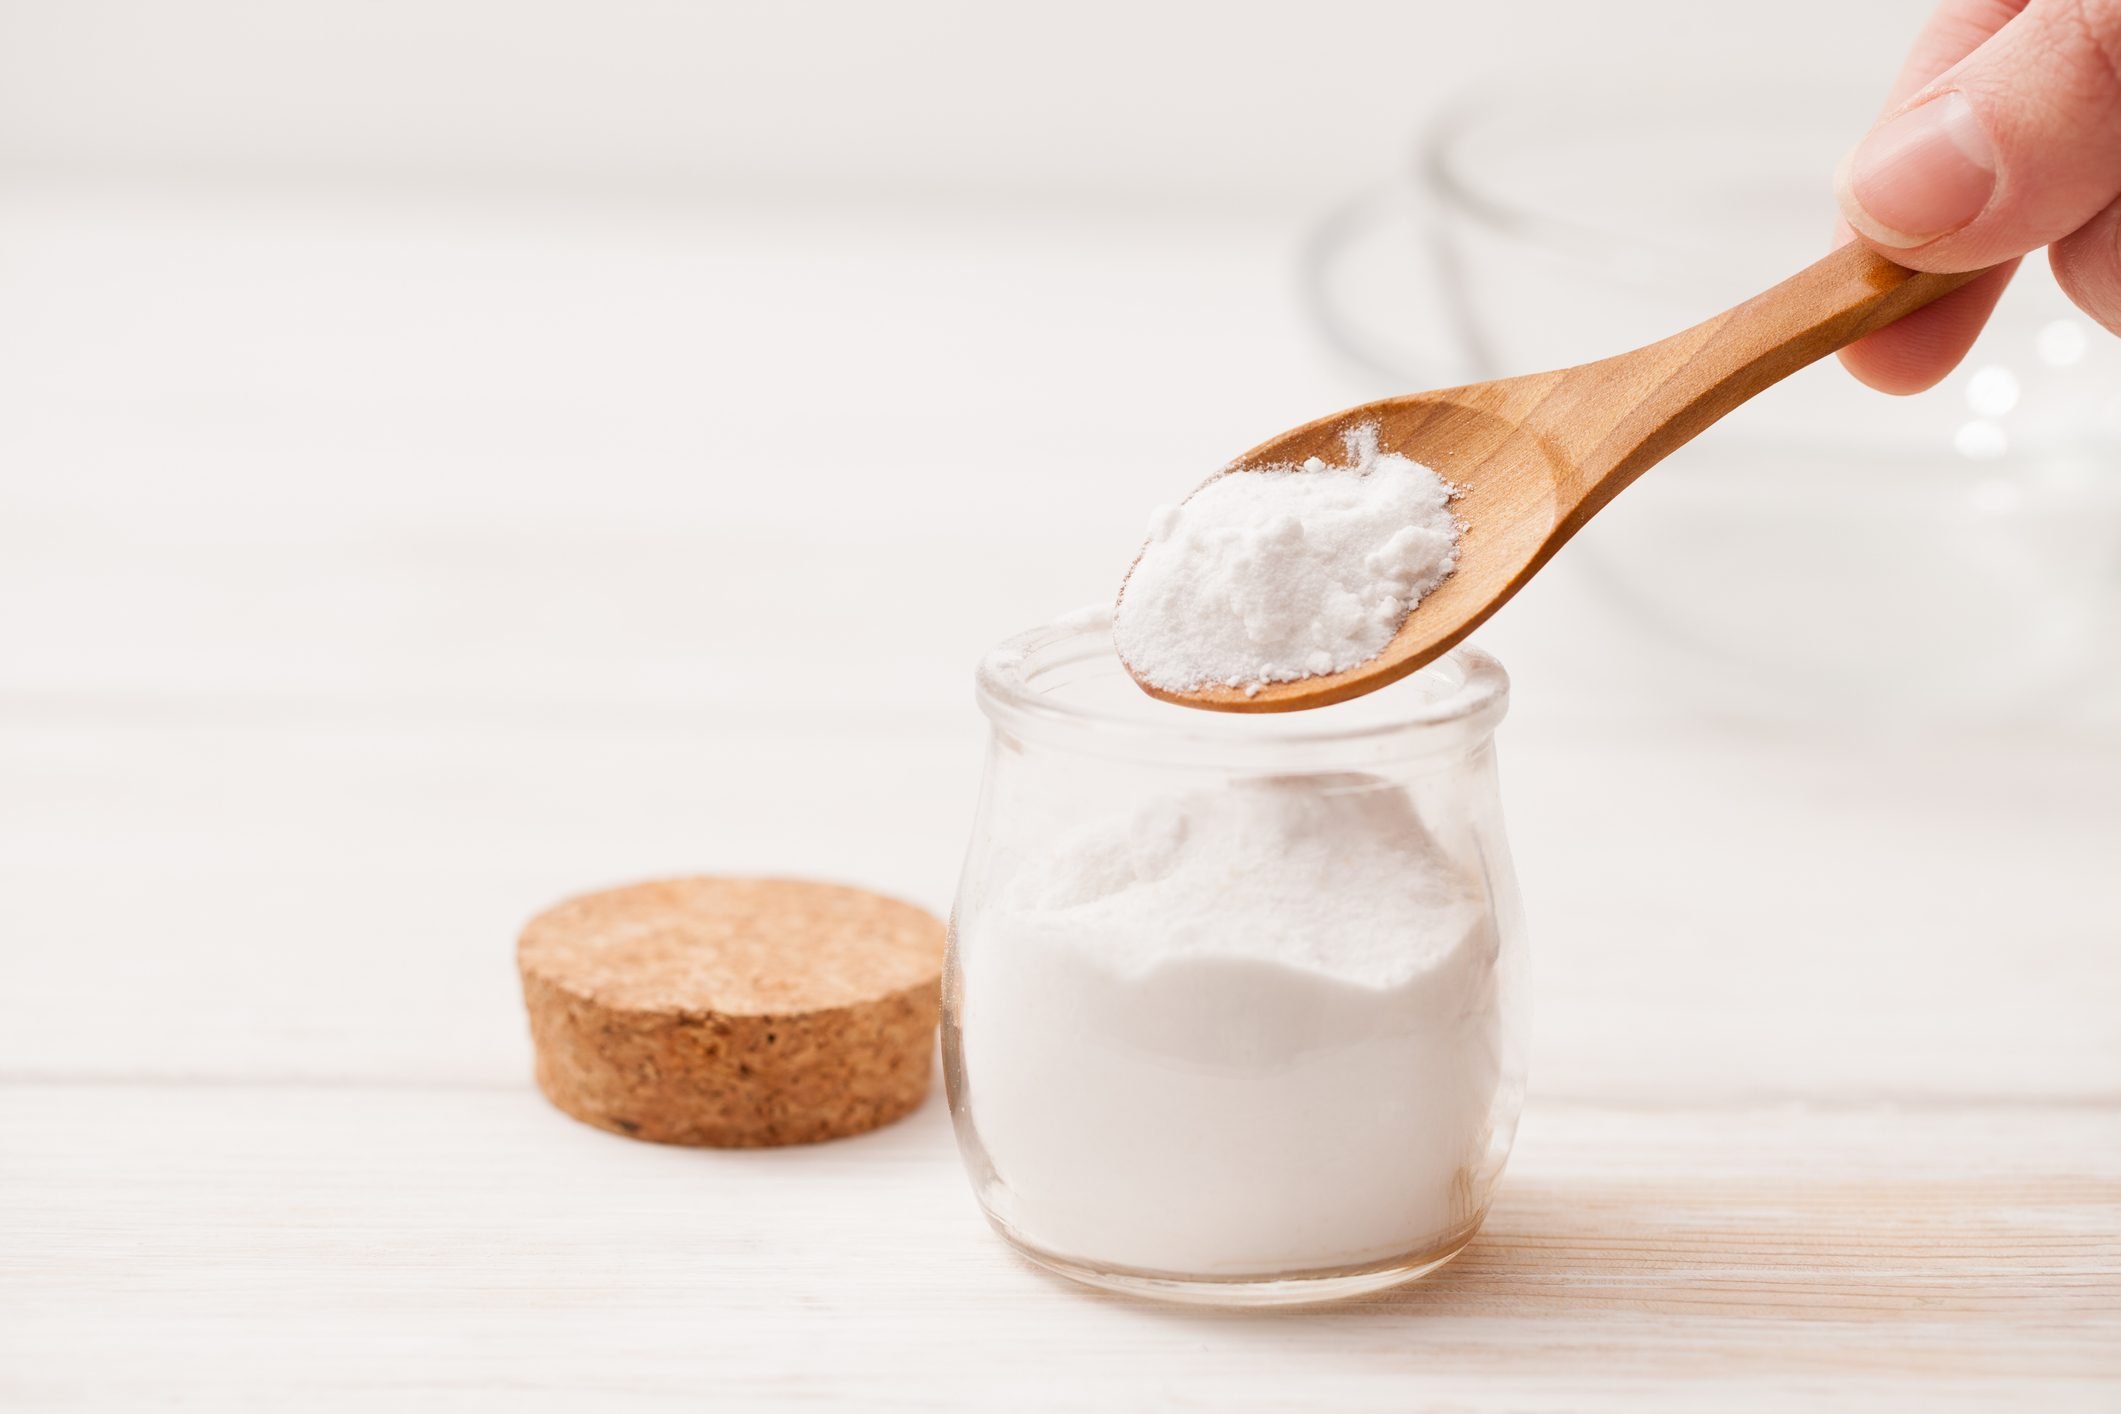 10 Healthy Uses for Baking Soda